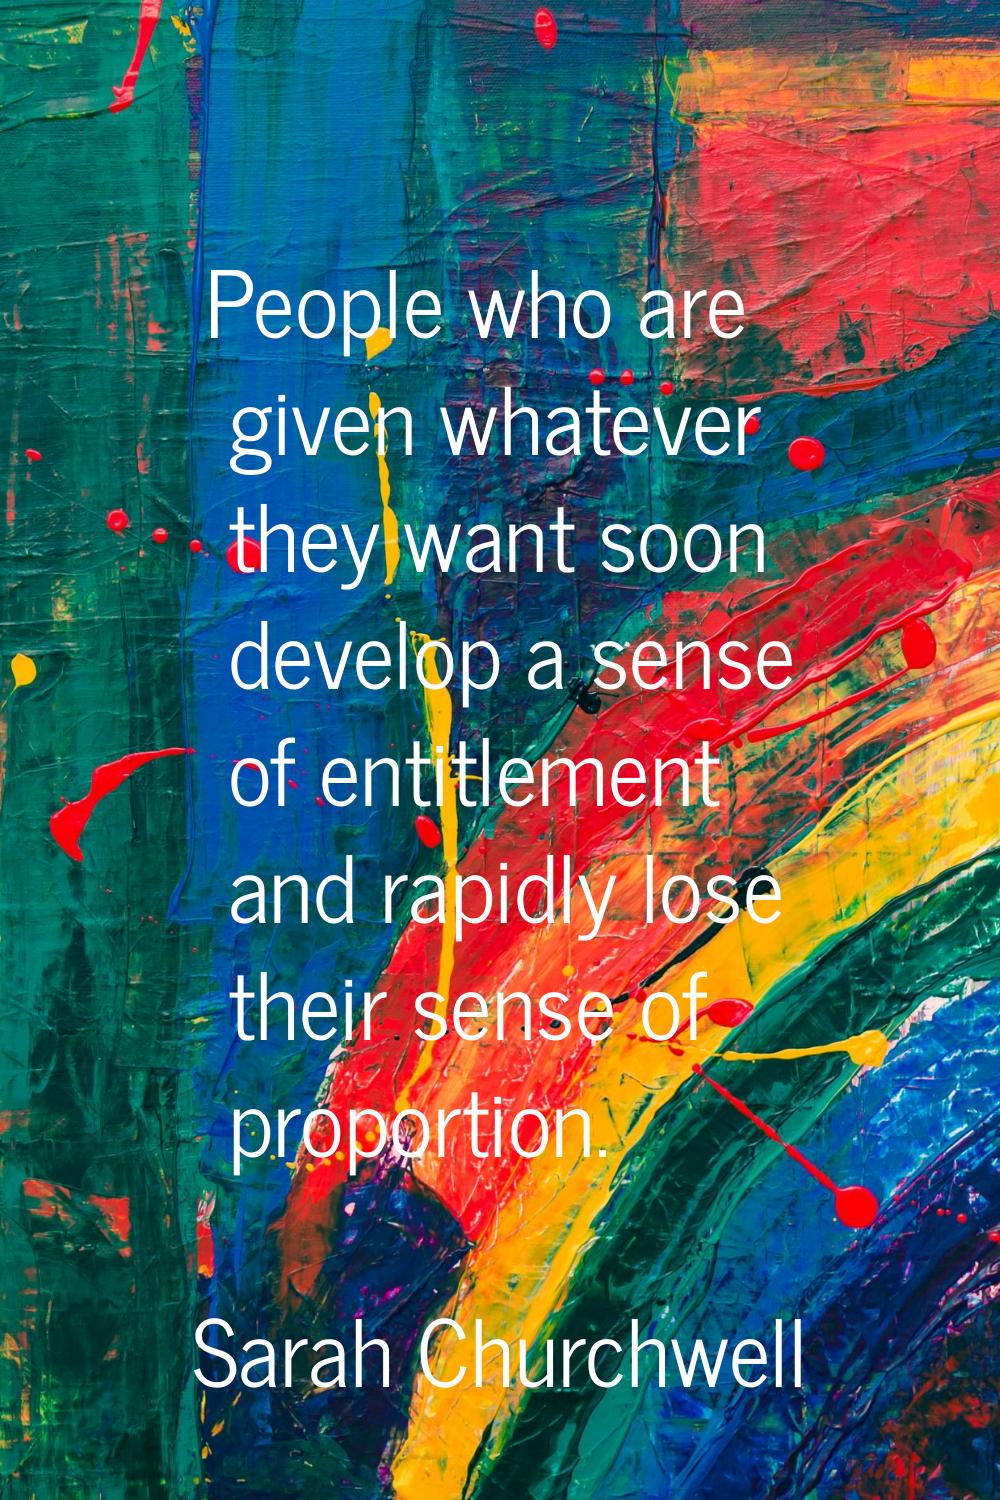 People who are given whatever they want soon develop a sense of entitlement and rapidly lose their 